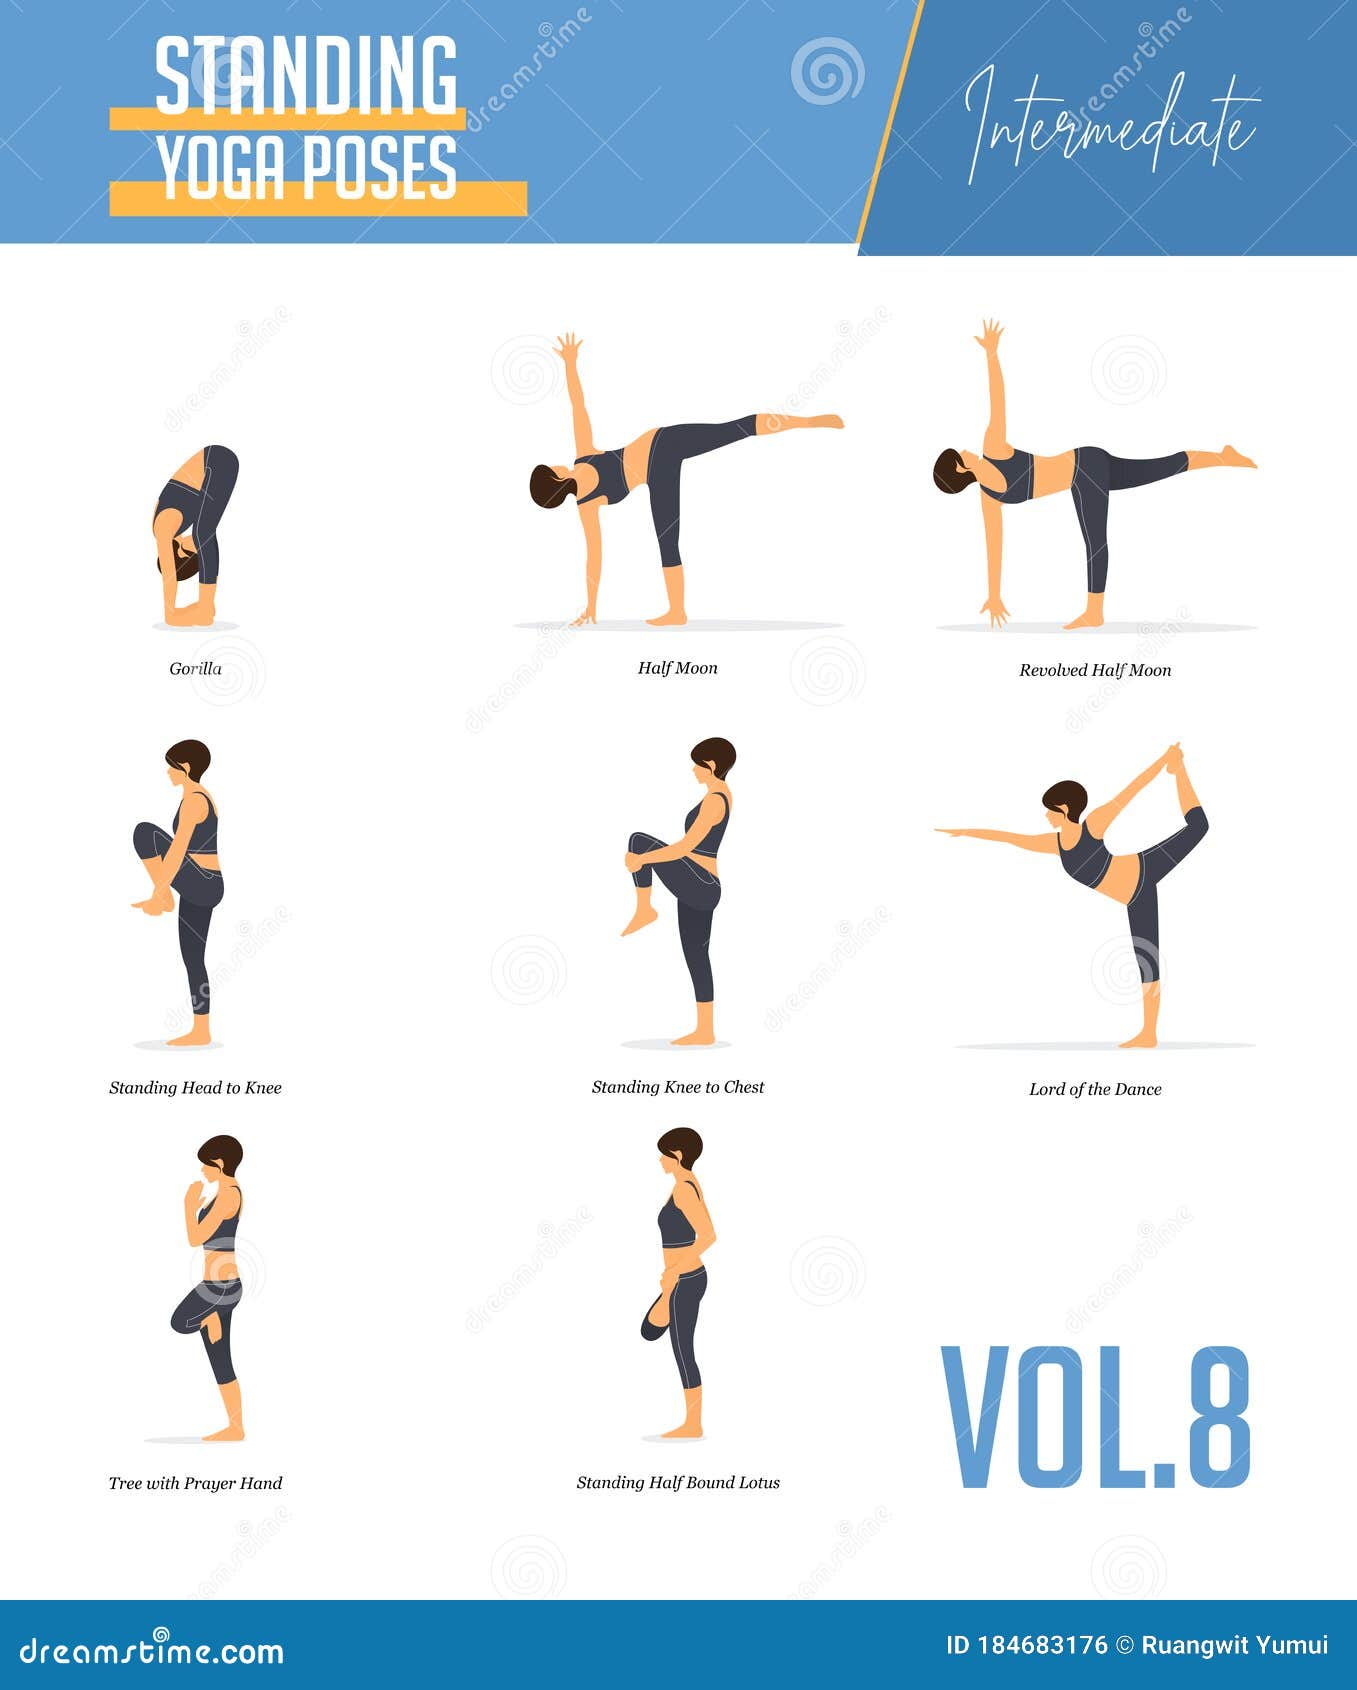 Buy Yoga Asanas Chart Book: lllustrated Yoga Pose Chart with 60 Poses (aka  Postures, Asanas, Positions) - Pose Names in Sanskrit and English - Great  for Hatha Yoga Beginners to Advanced (Paperback